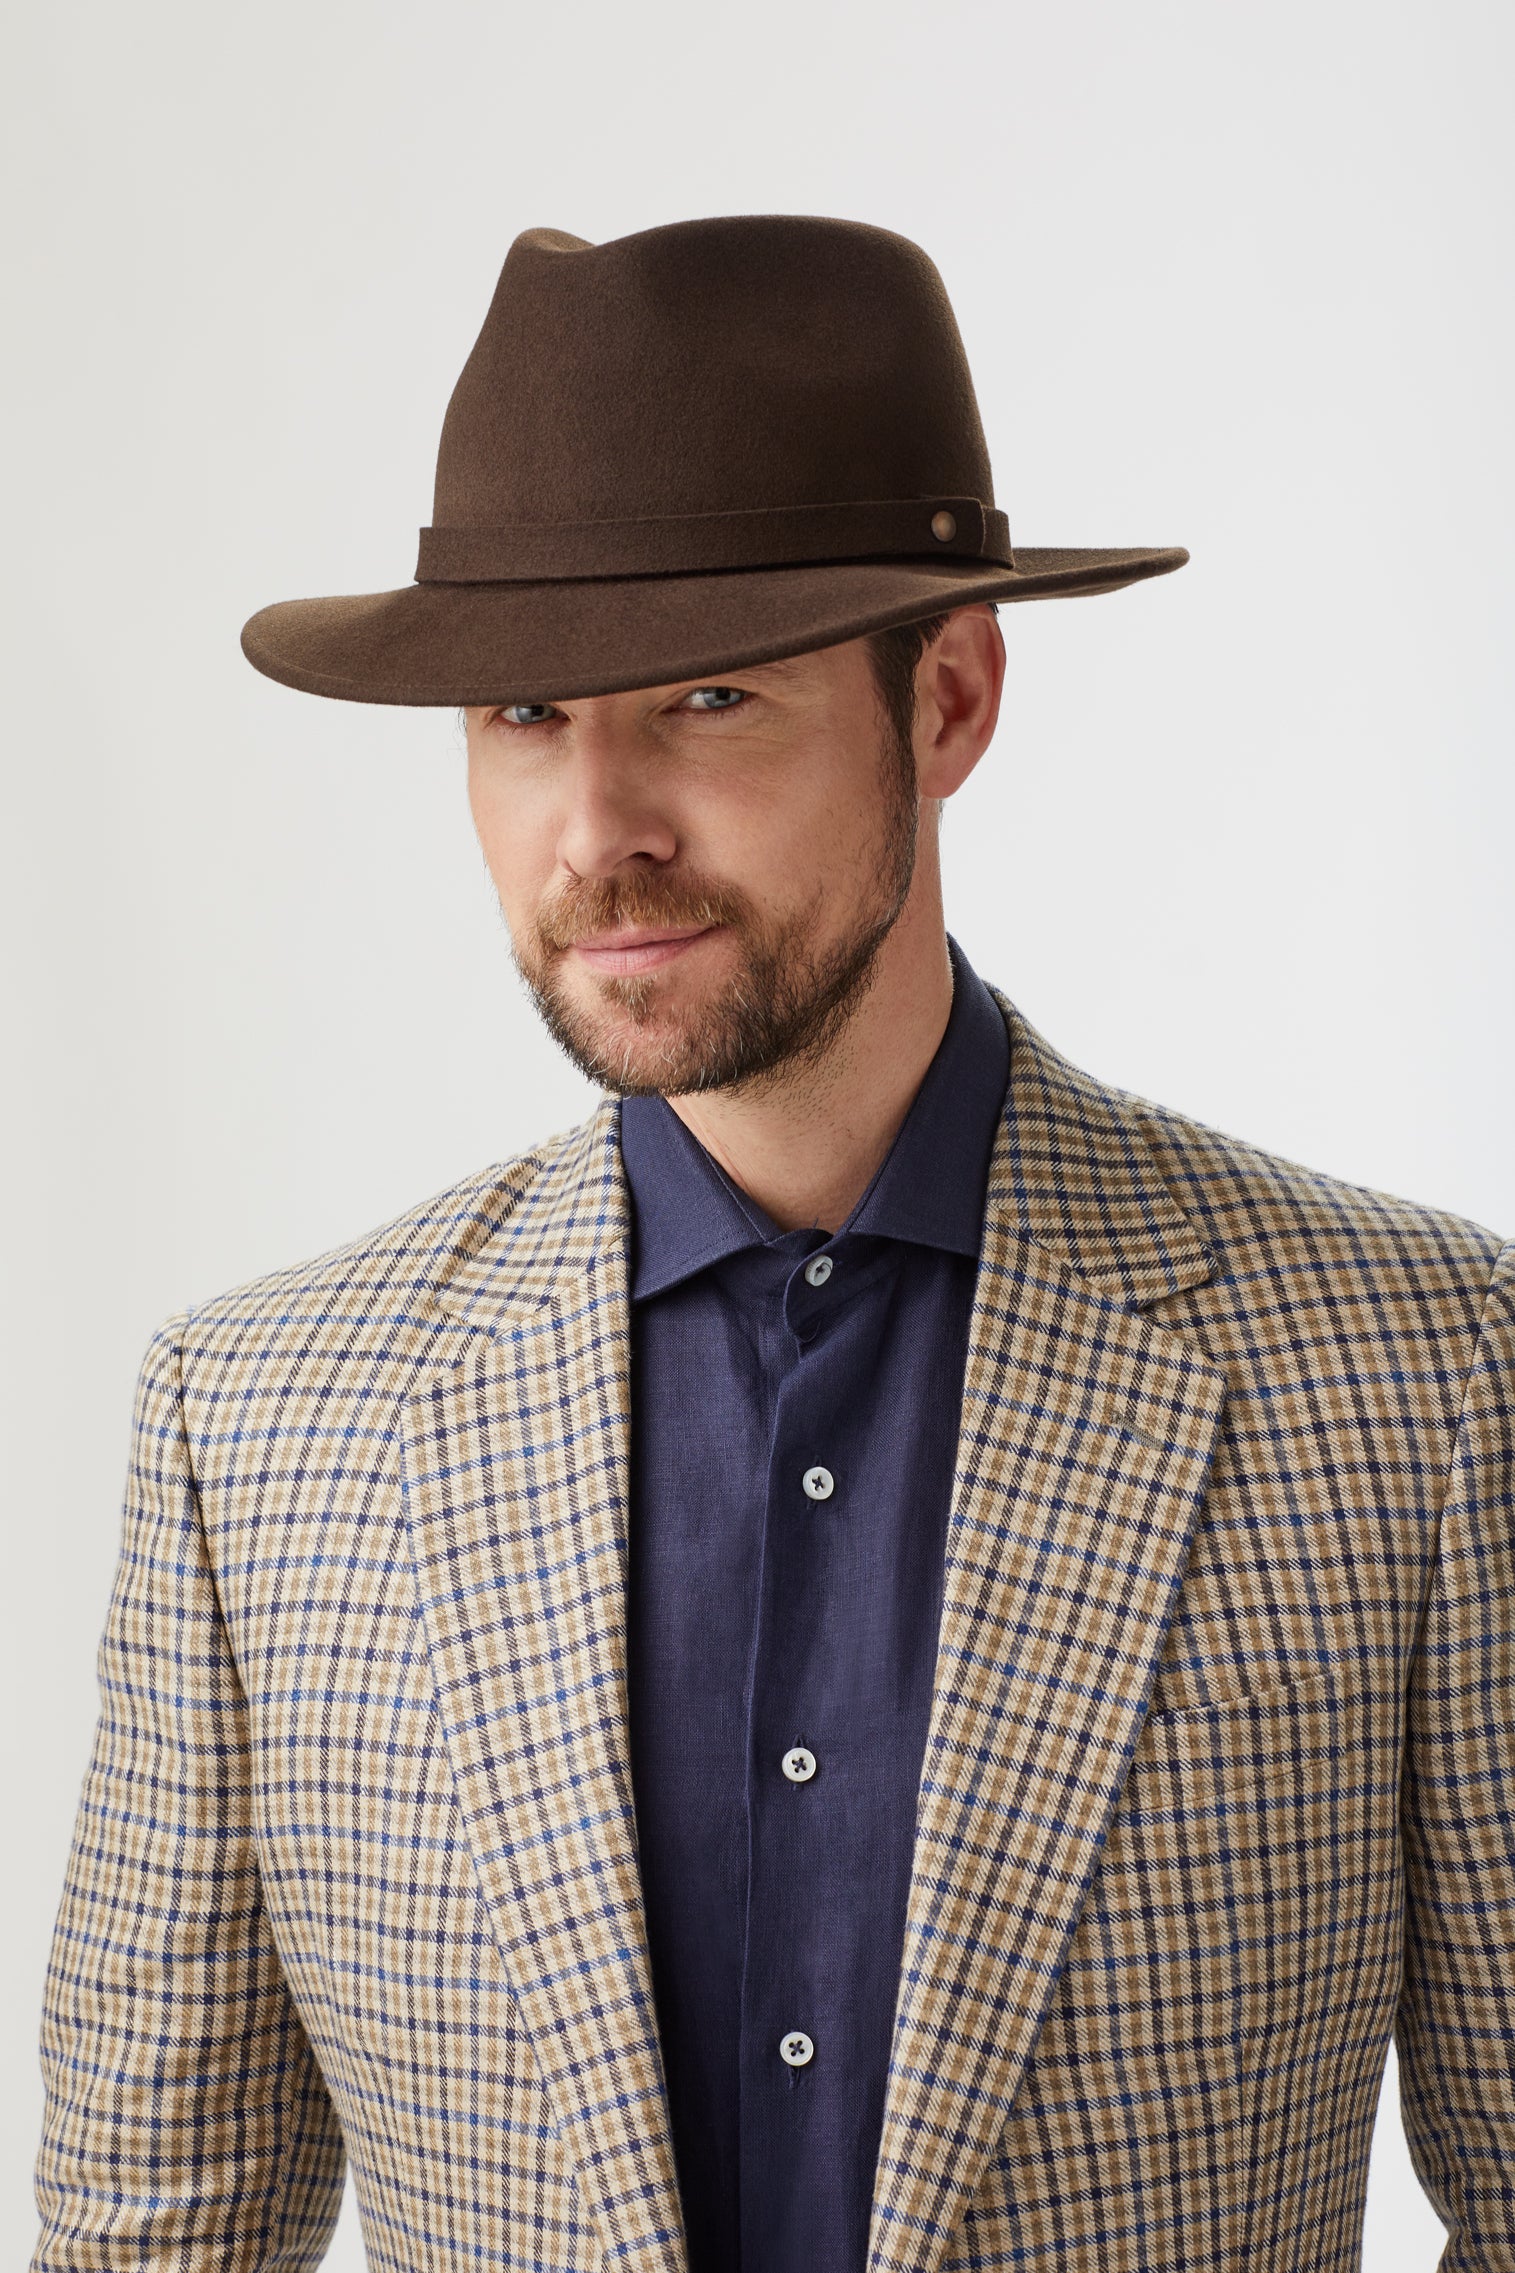 Nomad Rollable Trilby - Hats for Cheltenham Races - Lock & Co. Hatters London UK